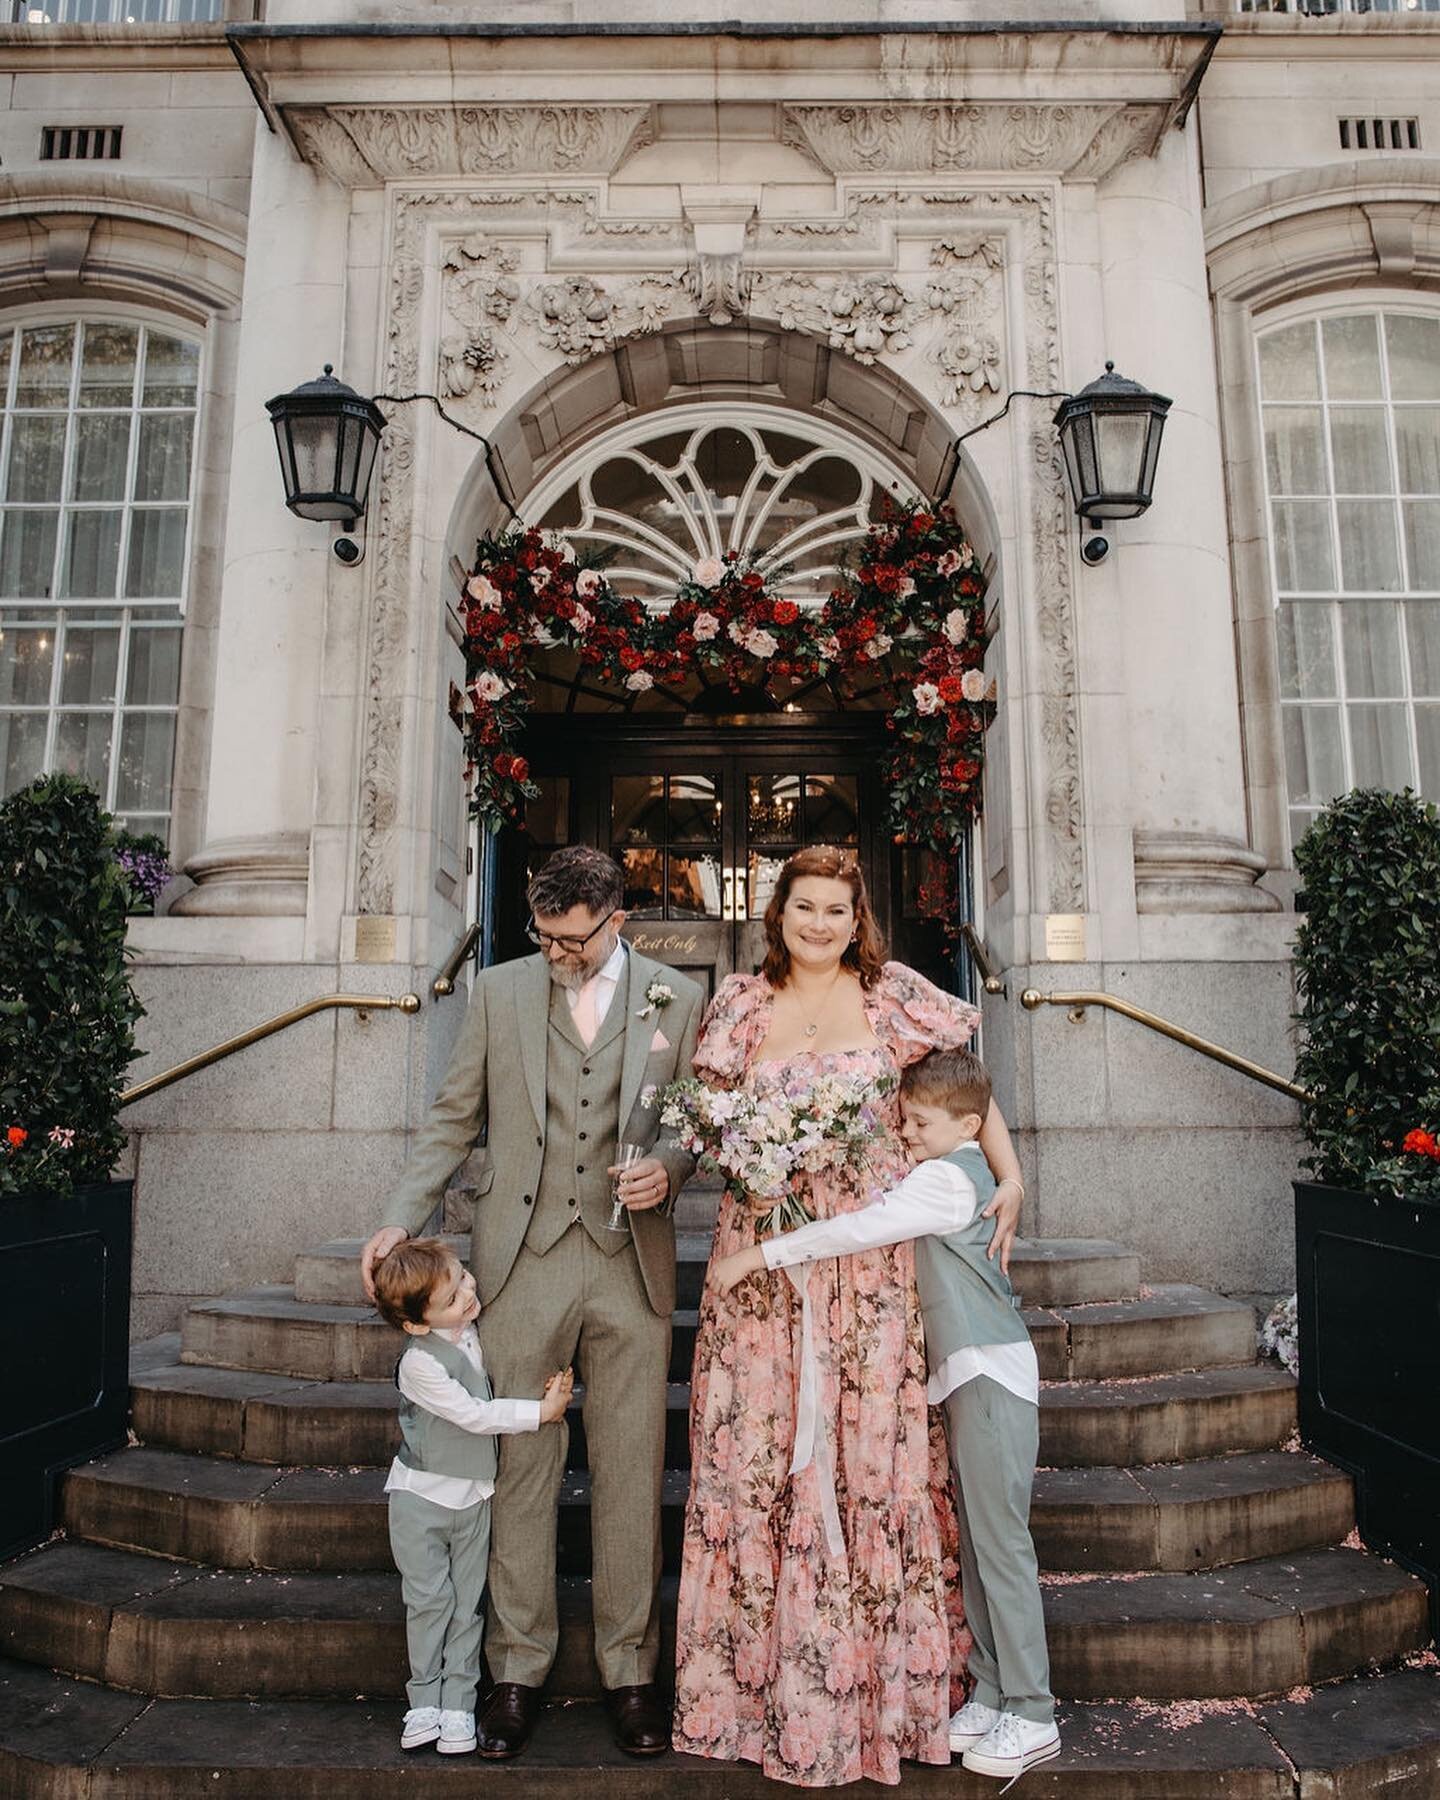 Very much not over our wedding photos, we&rsquo;ve just got them all back and love love love them. A selection of my faves (absolutely impossible to choose 10!) 🩷
.
📸 @sammytaylorweddingphotography
💐 @floralkind
🍽️ @daphneslondon
👗 @selkie 
🕴️ 